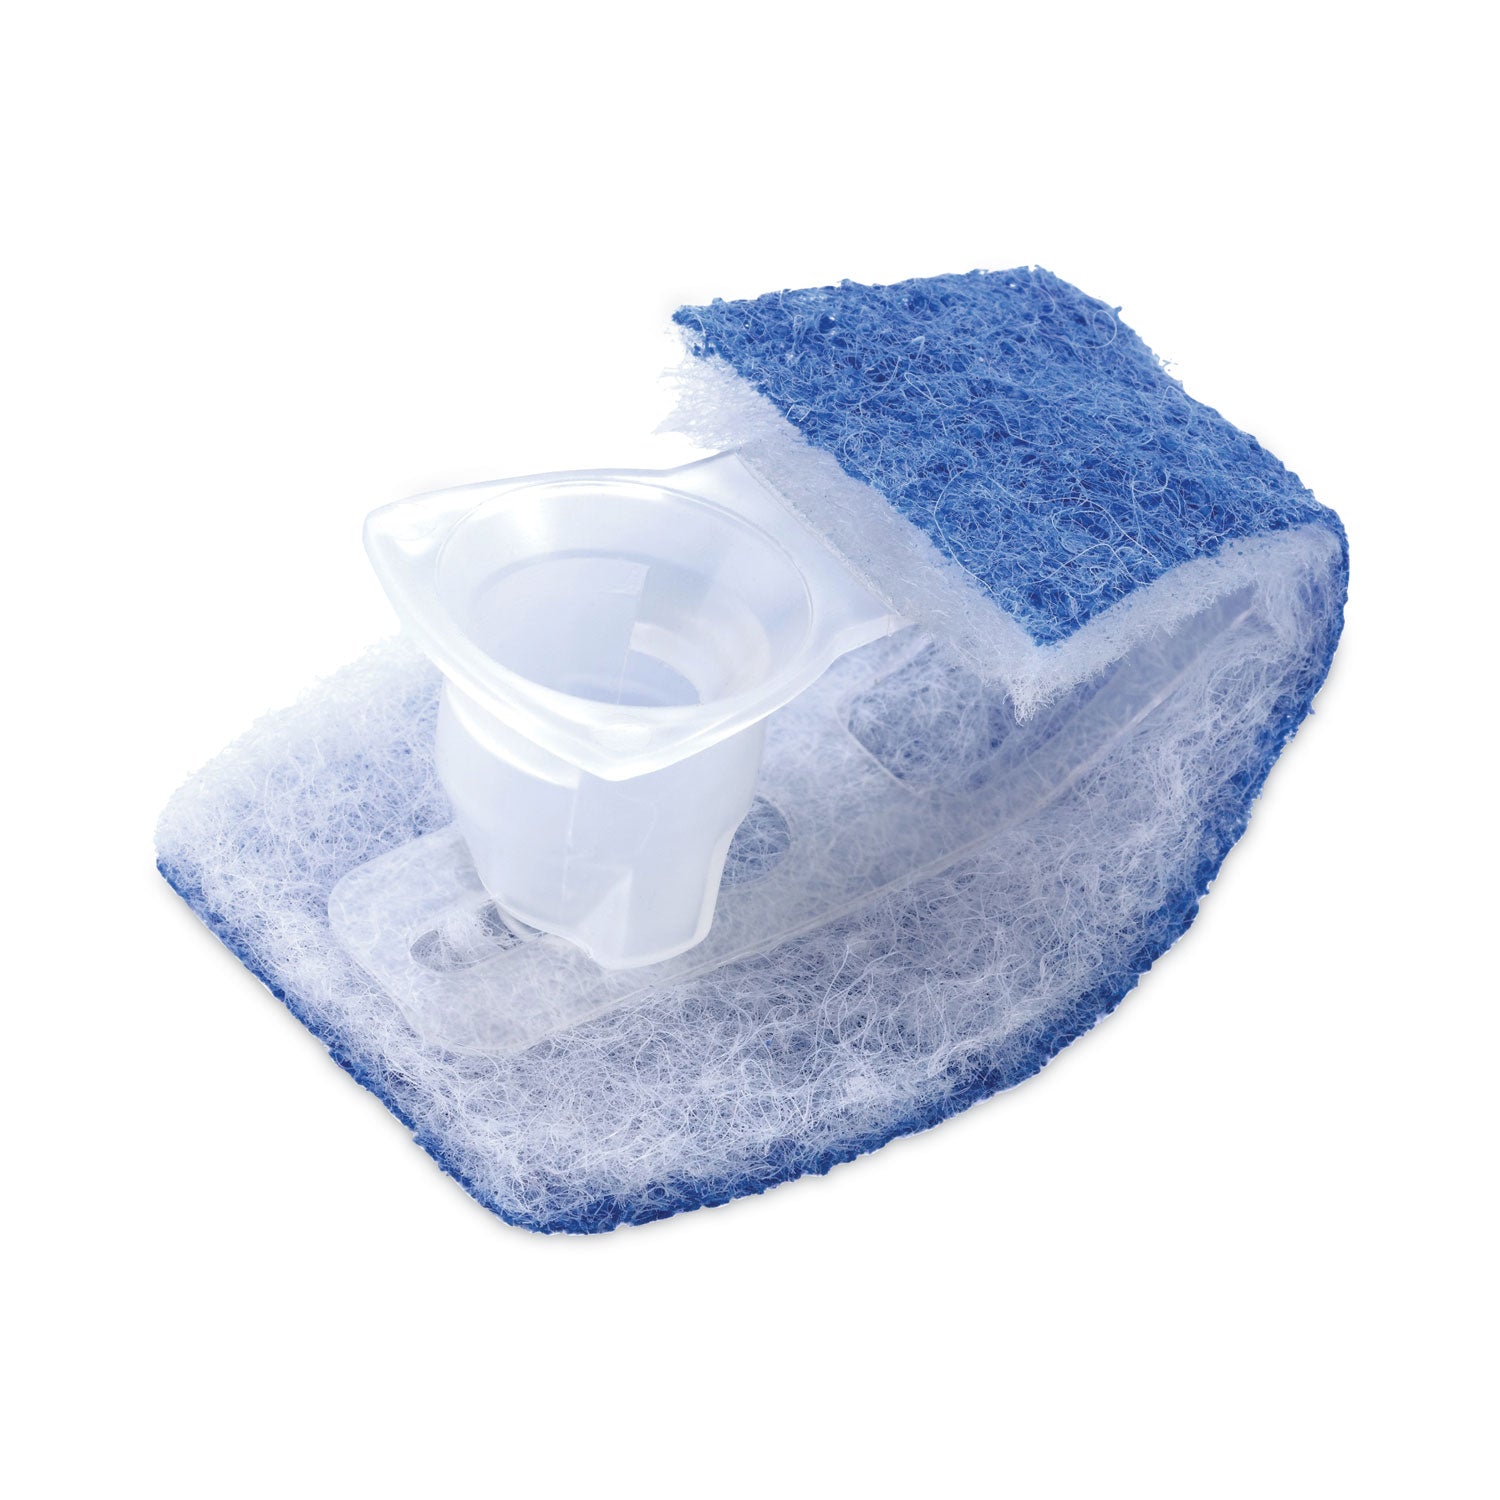 toilet-scrubber-starter-kit-1-handle-and-5-scrubbers-white-blue_mmm558sk4np - 3